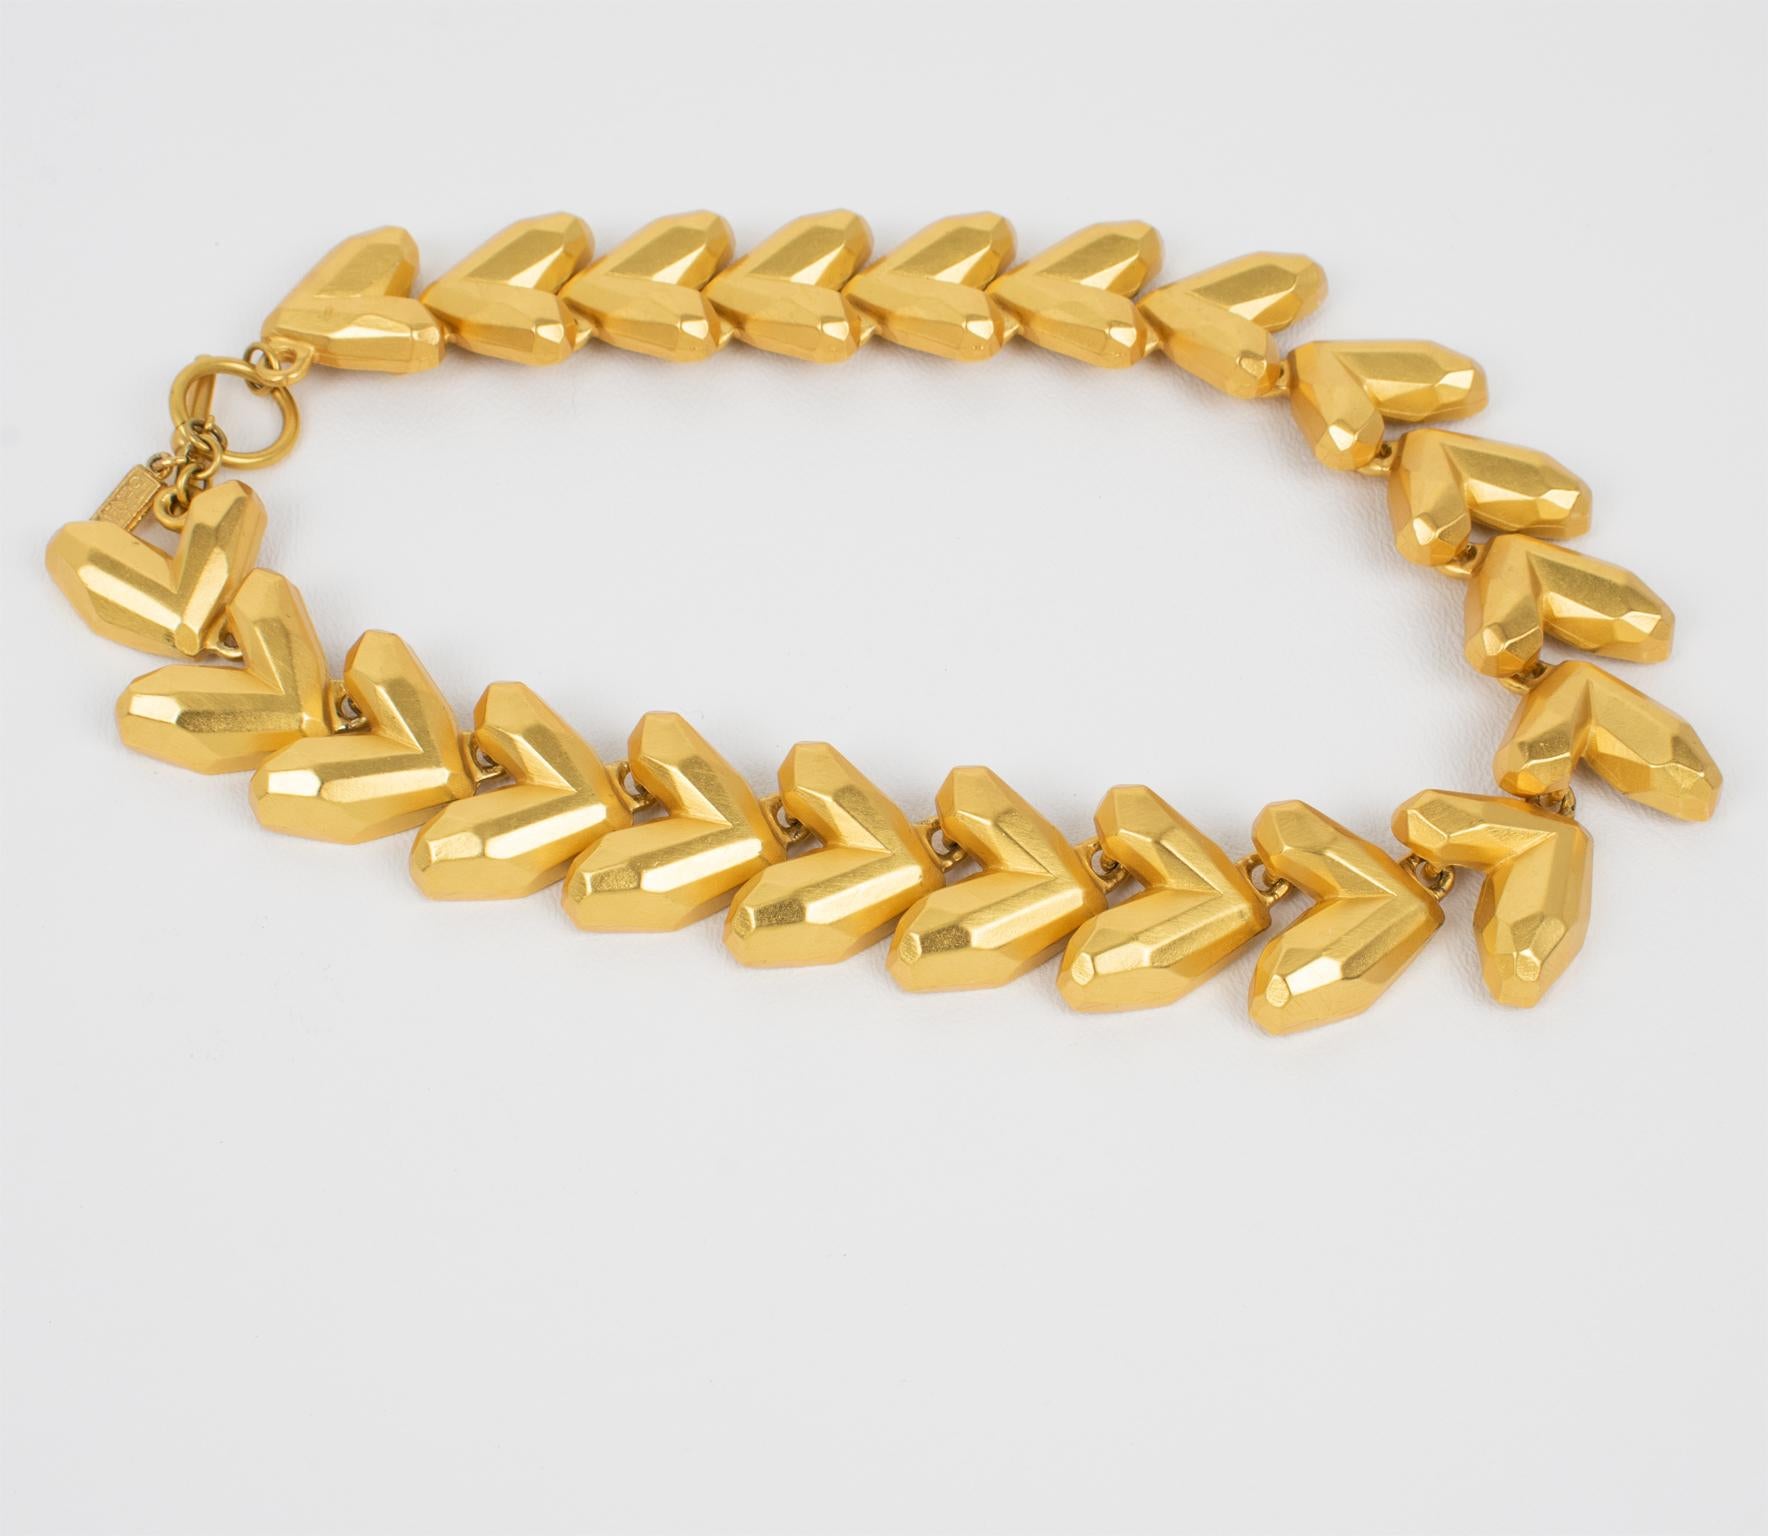 Kenzo Paris Gilt Metal Geometric Choker Necklace In Excellent Condition For Sale In Atlanta, GA